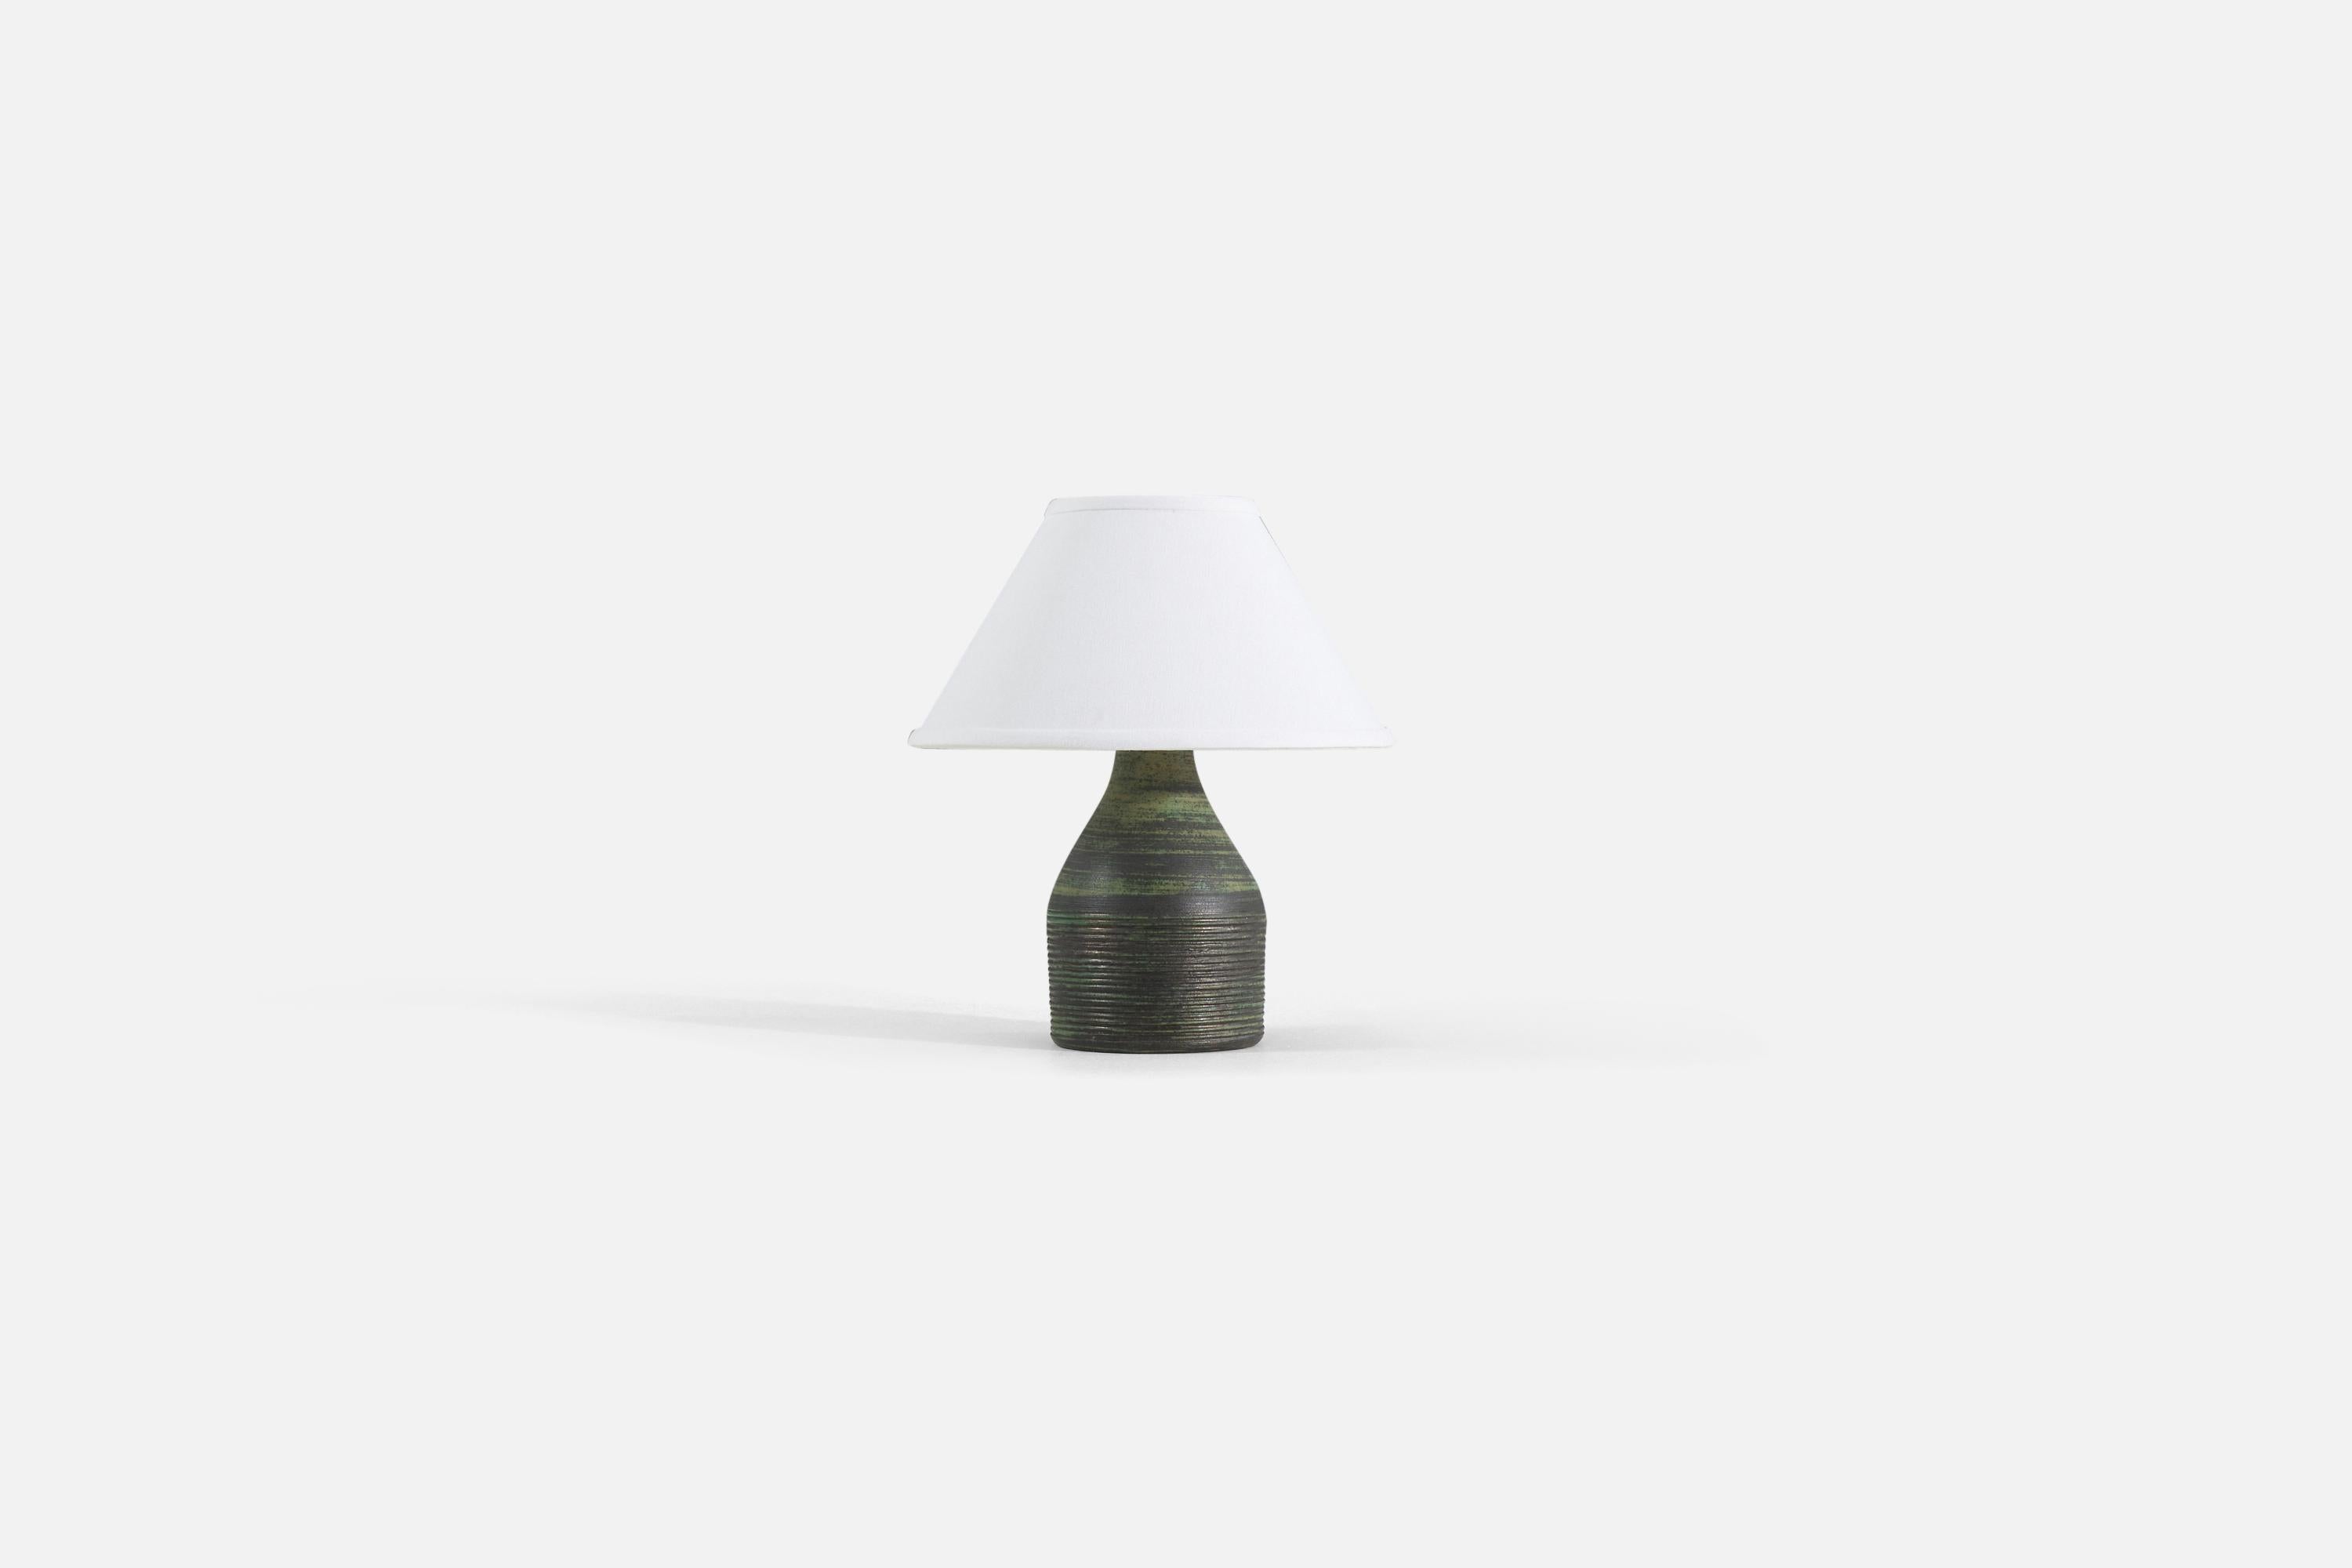 A green-glazed and incised stoneware table lamp produced in Denmark, 1960s.

Measurements listed are of lamp. Sold without lampshade.

For reference.

Shade : 4.5 x 10.25 x 6
Lamp with shade : 11.5 x 10.25 x 10.25.